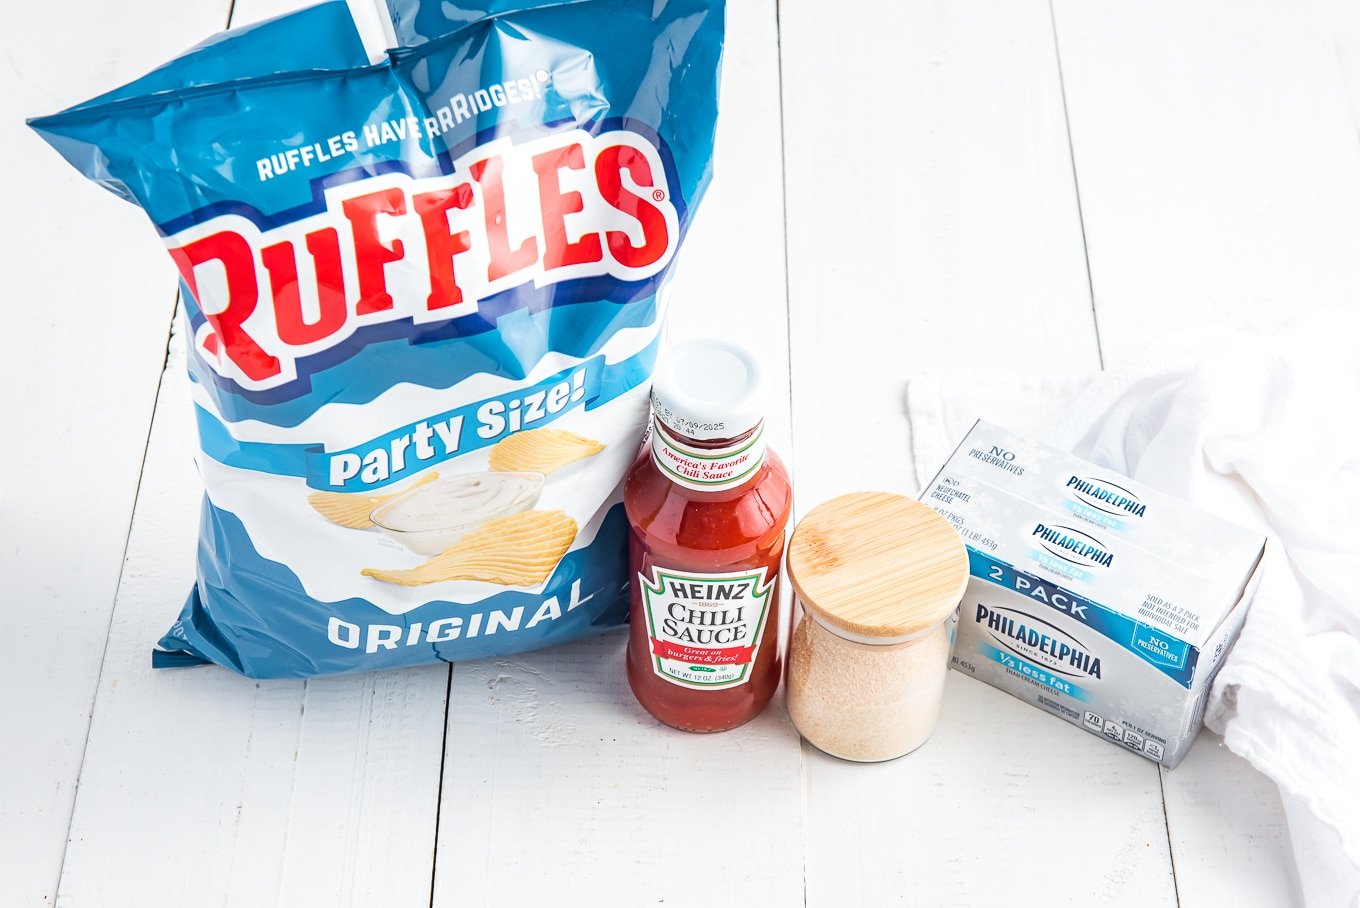 All of the ingredients for the best potato chip dip: Heinz chili sauce, cream cheese, onion salt, and potato chips.